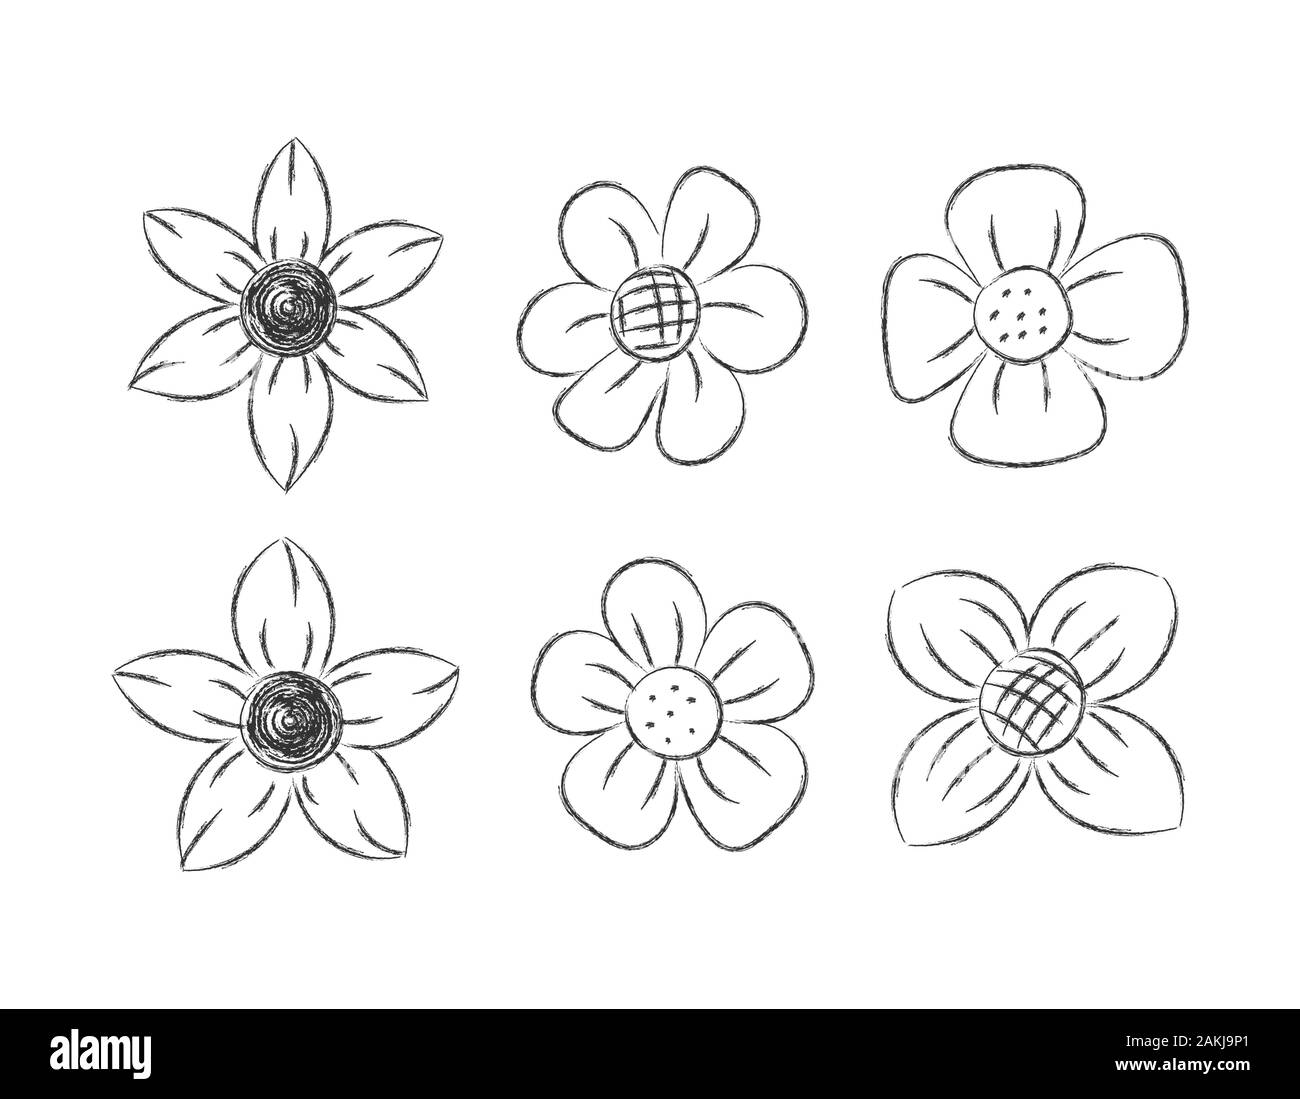 https://c8.alamy.com/comp/2AKJ9P1/set-of-color-vector-pencil-drawing-in-the-style-of-doodles-for-greeting-cards-posters-stickers-and-seasonal-design-isolated-on-a-white-background-2AKJ9P1.jpg